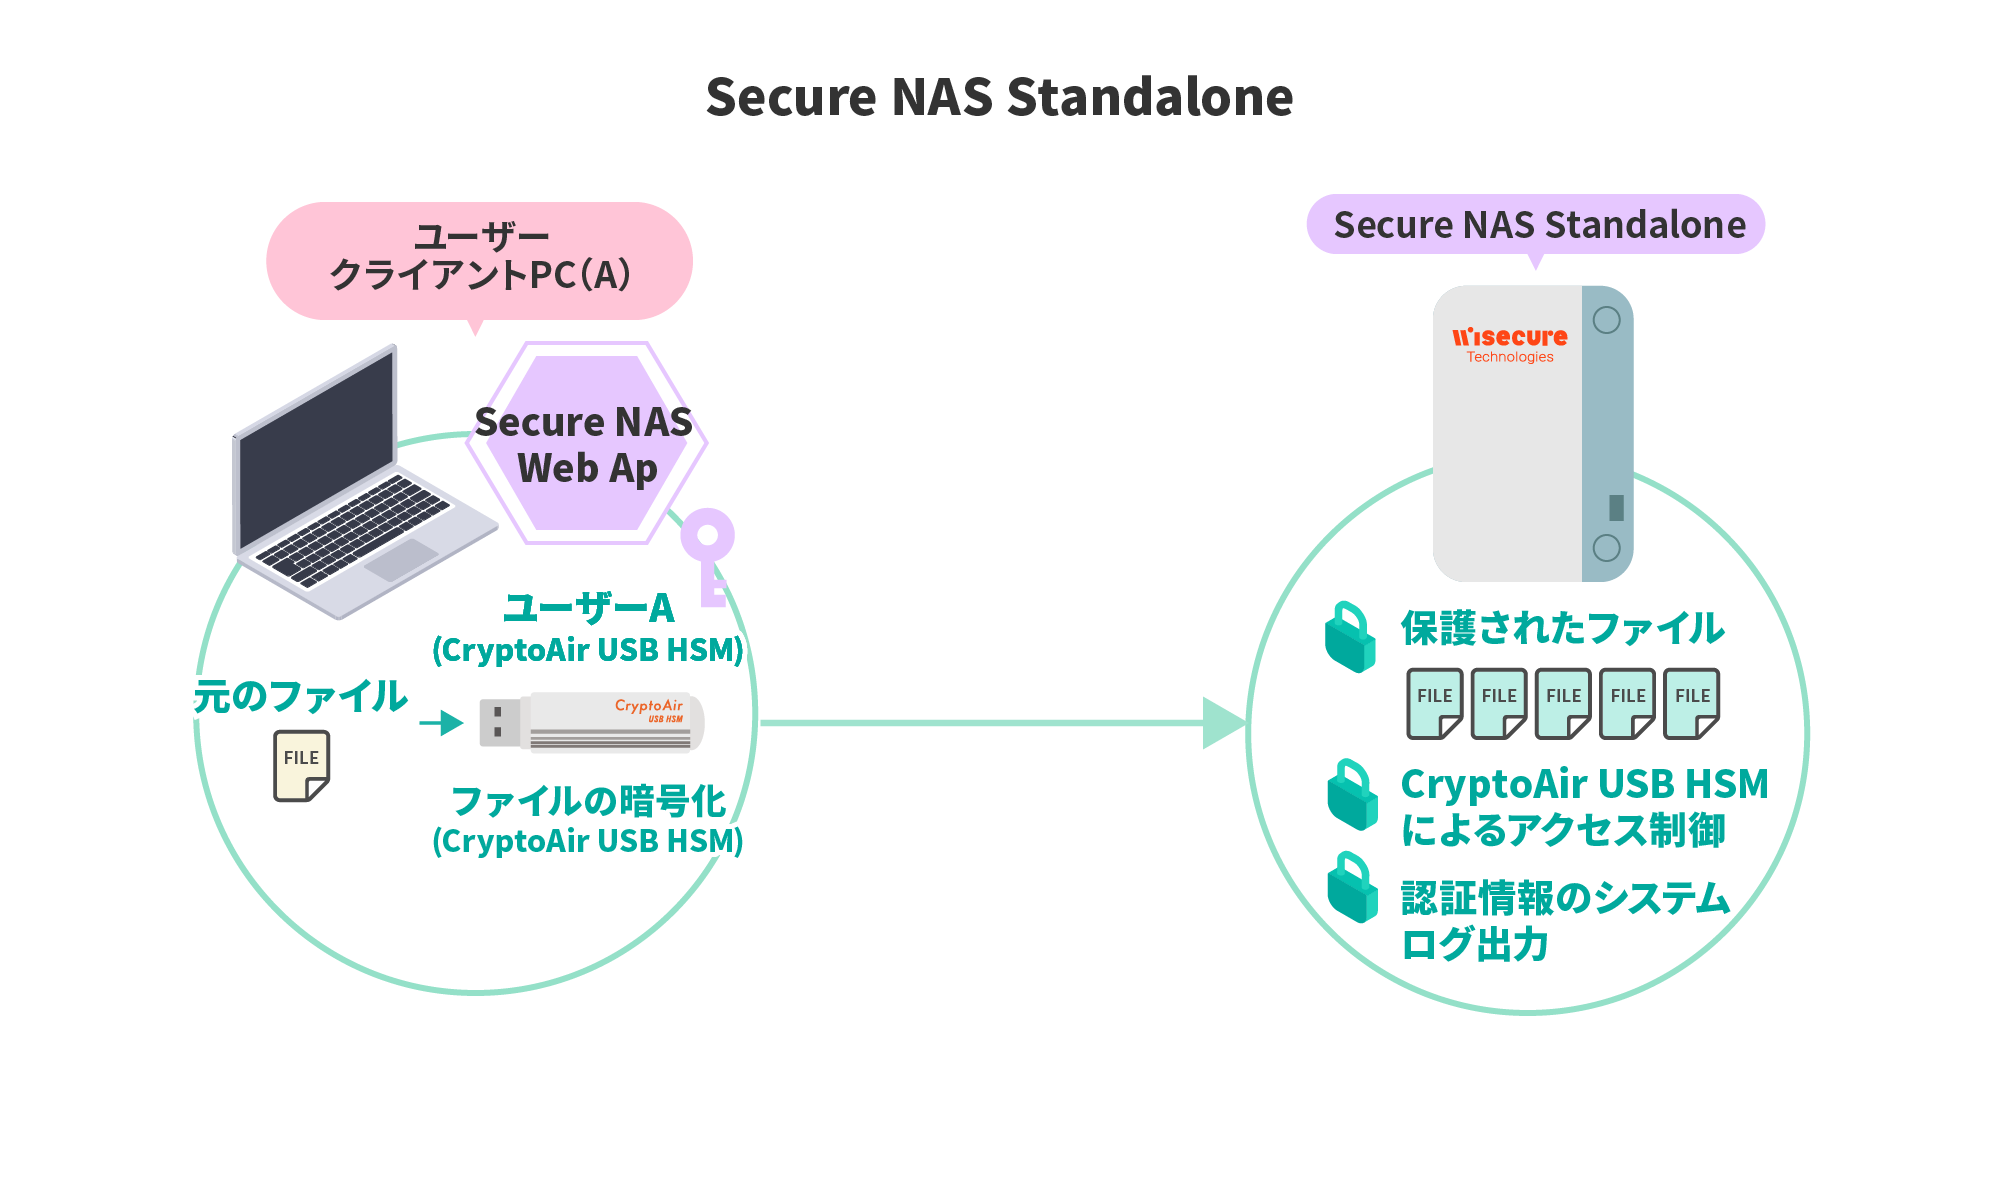 Secure NAS Standalone